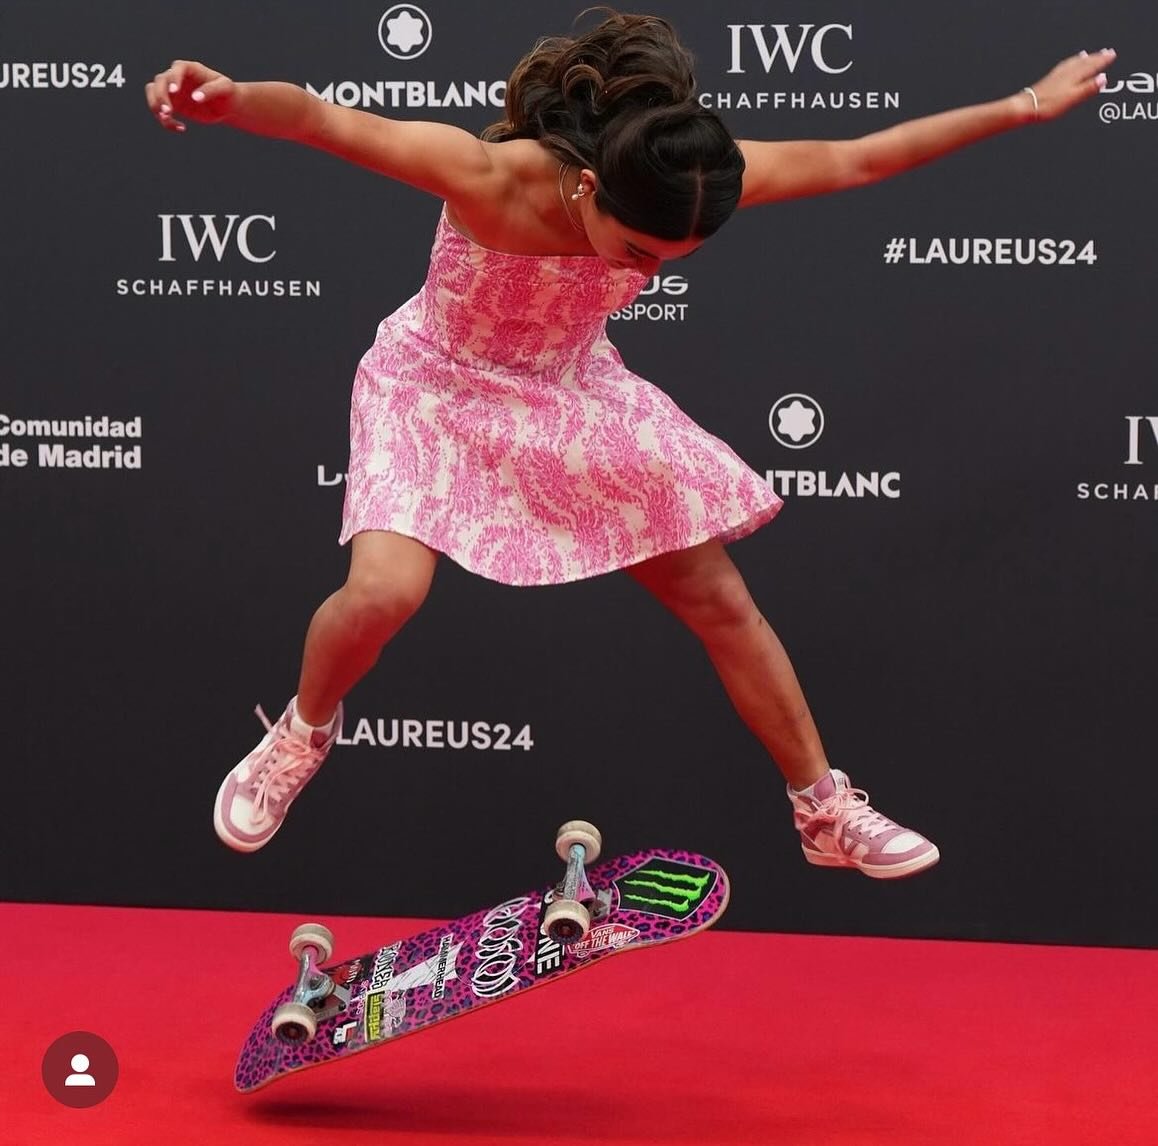 Weekend love for the red carpet energy @arisa_trew is bringing!! She just won @laureussport 2024 Action Sportsperson of the Year and we&rsquo;re cheering our lungs out over here! Giant congrats @arisa_trew and thank u @laureussport for recognizing sp